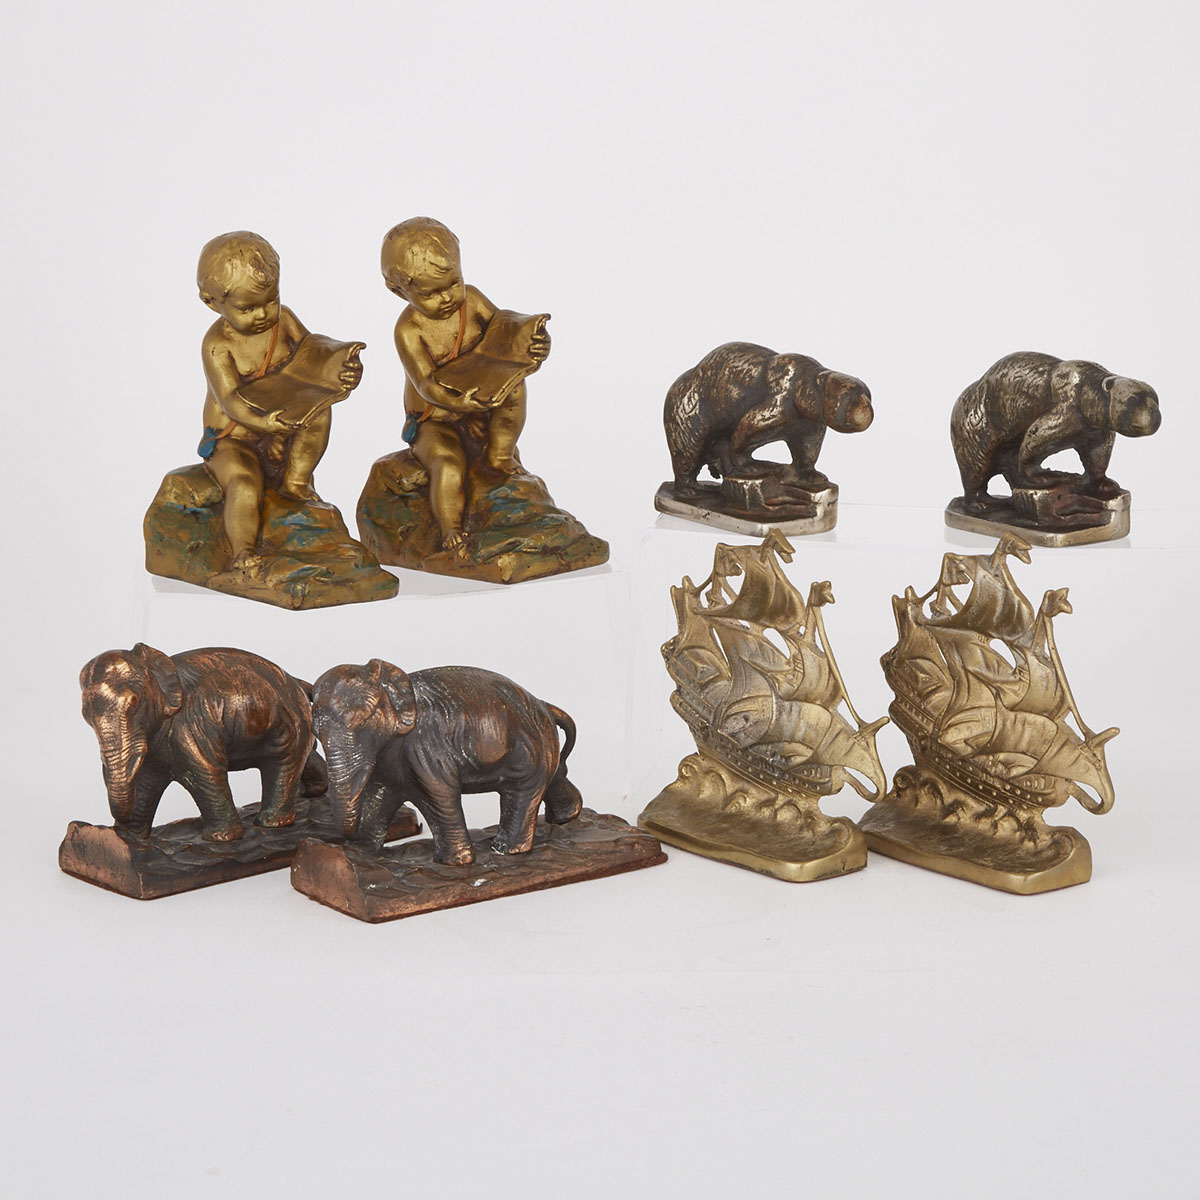 Four Pairs Metal Bookends, early 20th century